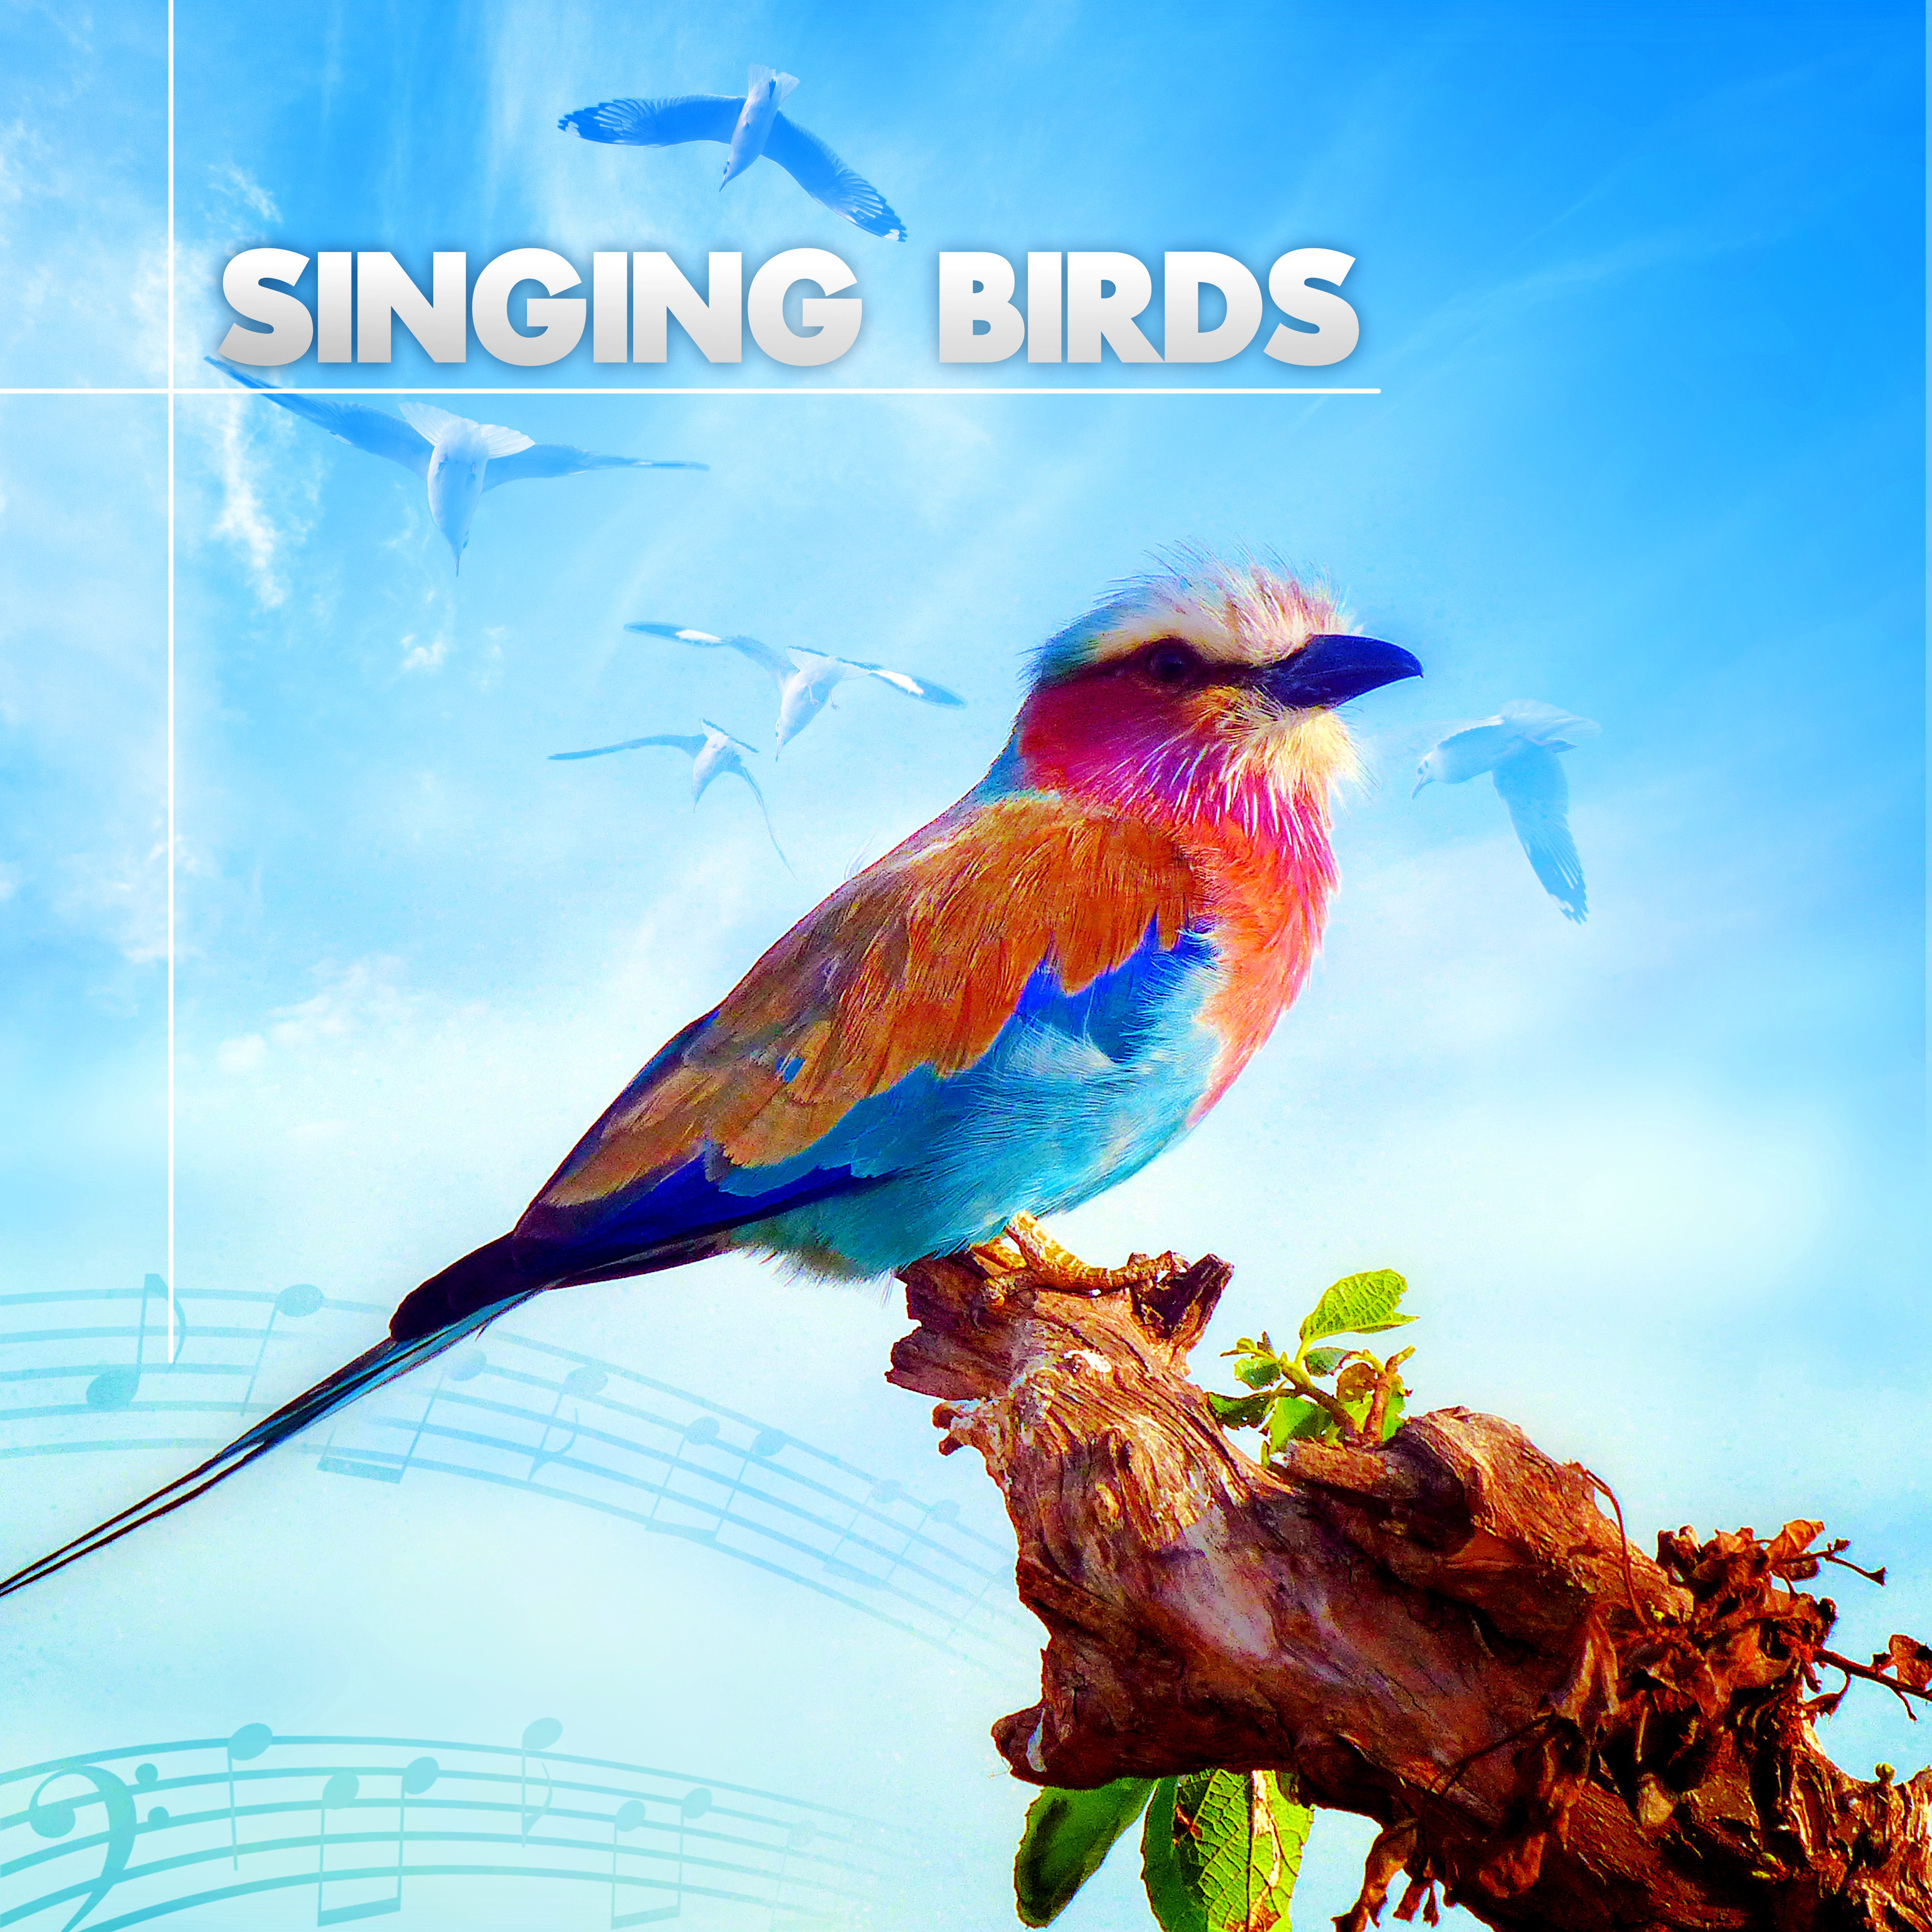 Singing Birds – Amazing Sound Effects of Birds, Forest Ambience, Morning Bird Calls for Relaxation